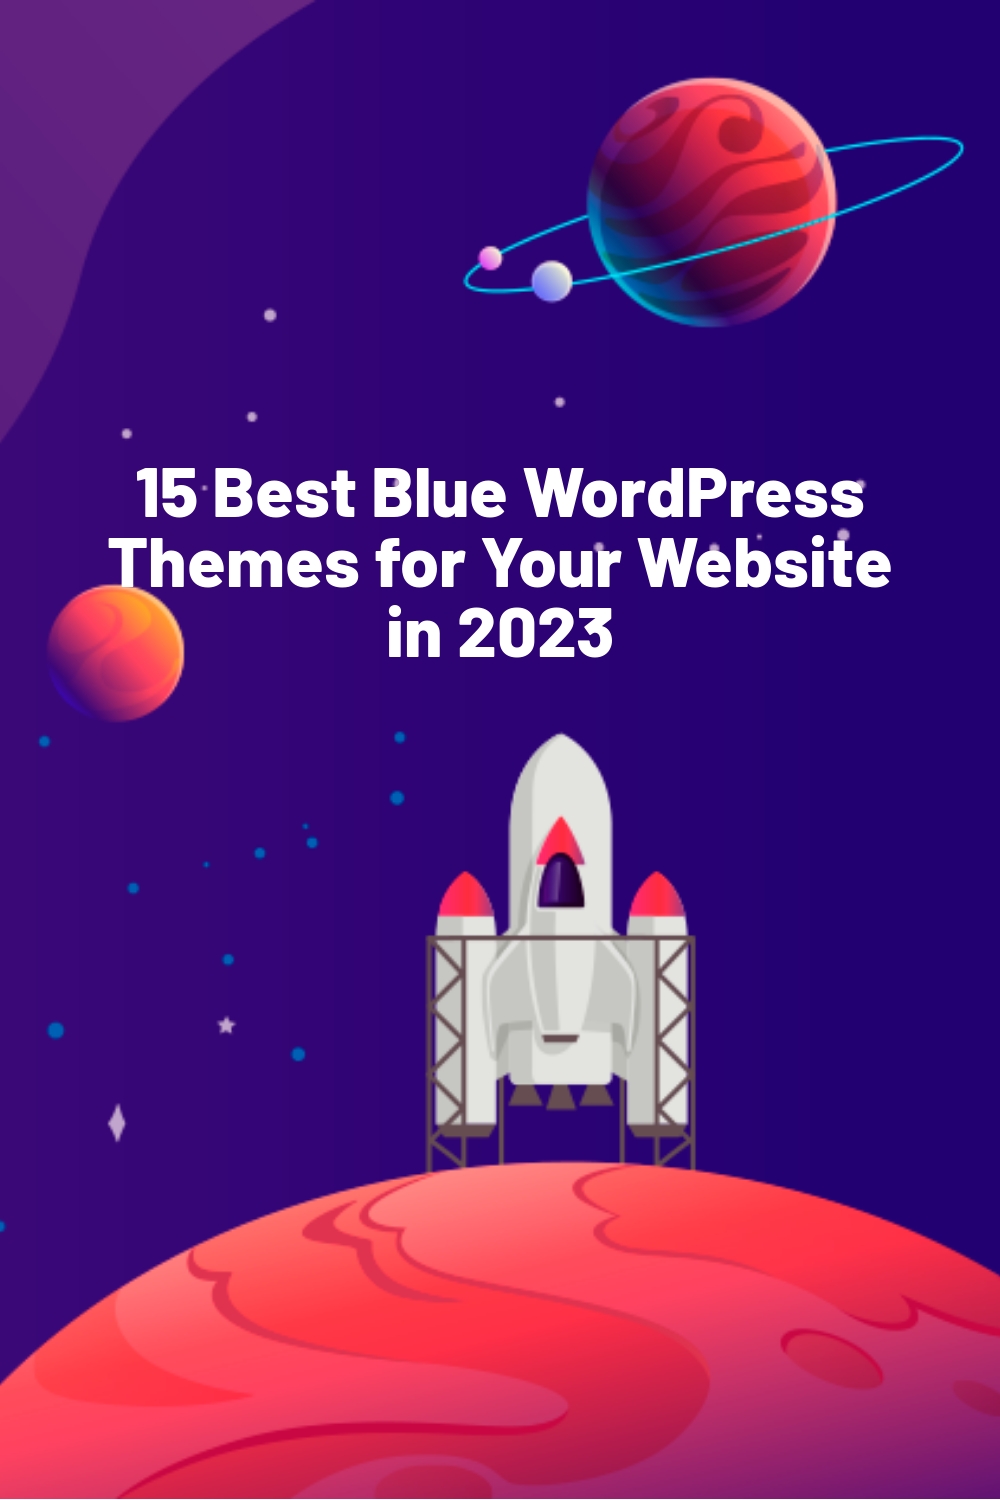 15 Best Blue WordPress Themes for Your Website in 2023